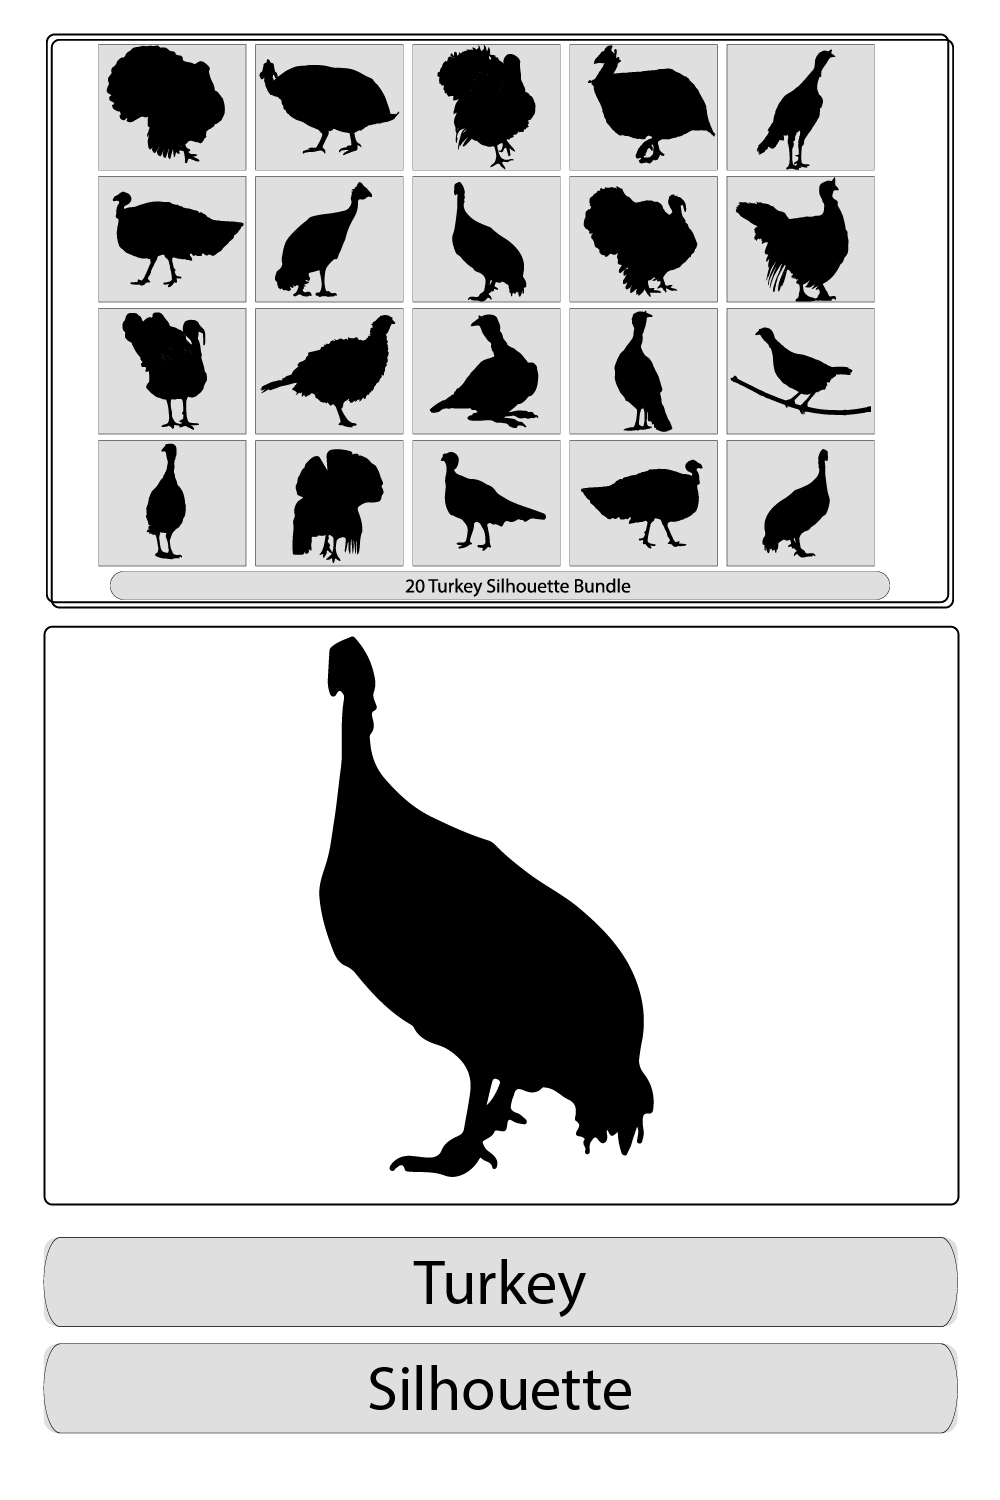 Turkey silhouette,Vector Turkey Silhouettes,vector drawing silhouettes of male and female turkeys, pinterest preview image.